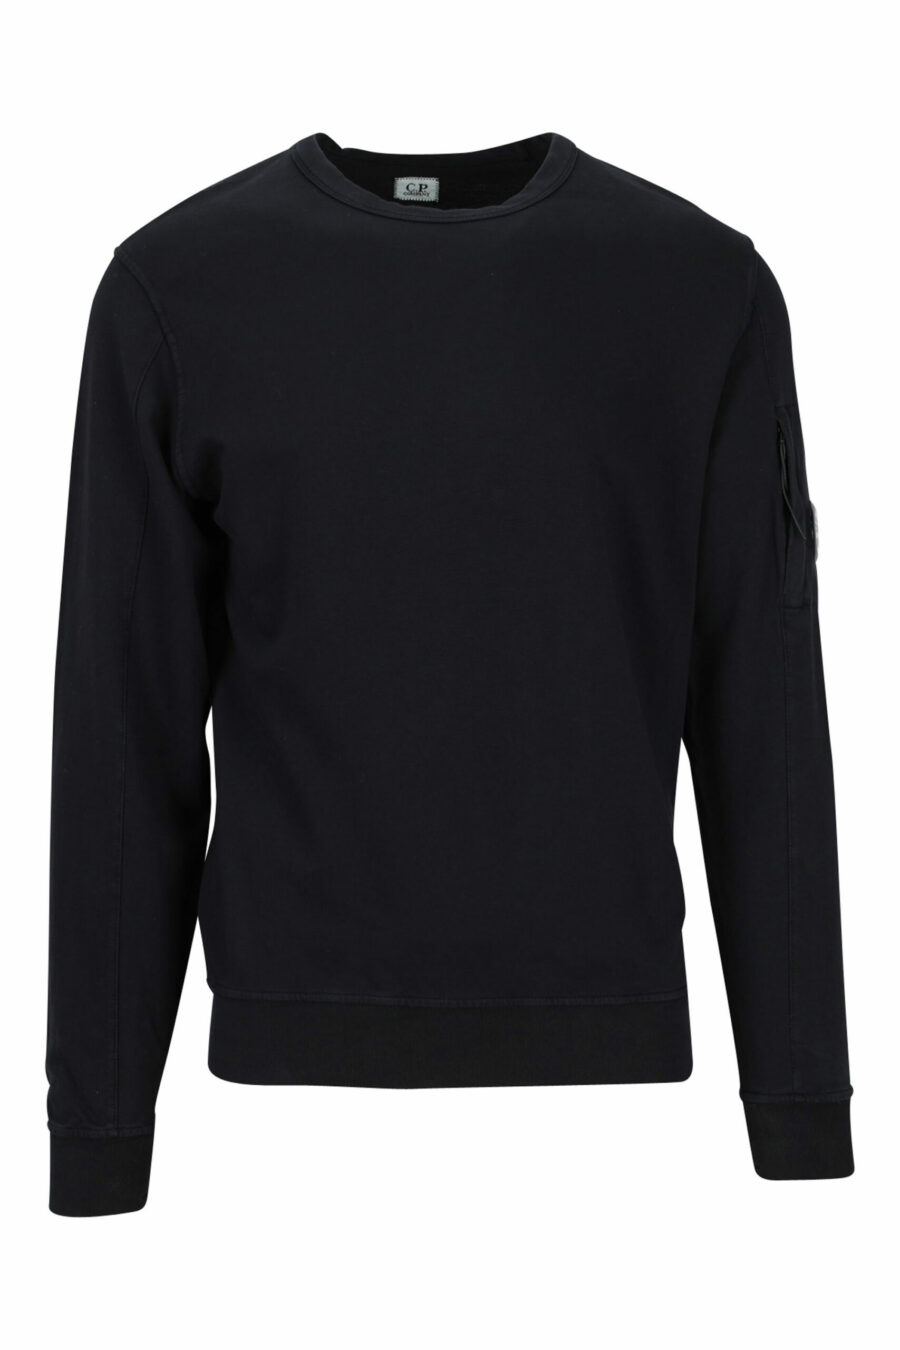 Black sweatshirt with side lens minilogue - 7620943592191 scaled